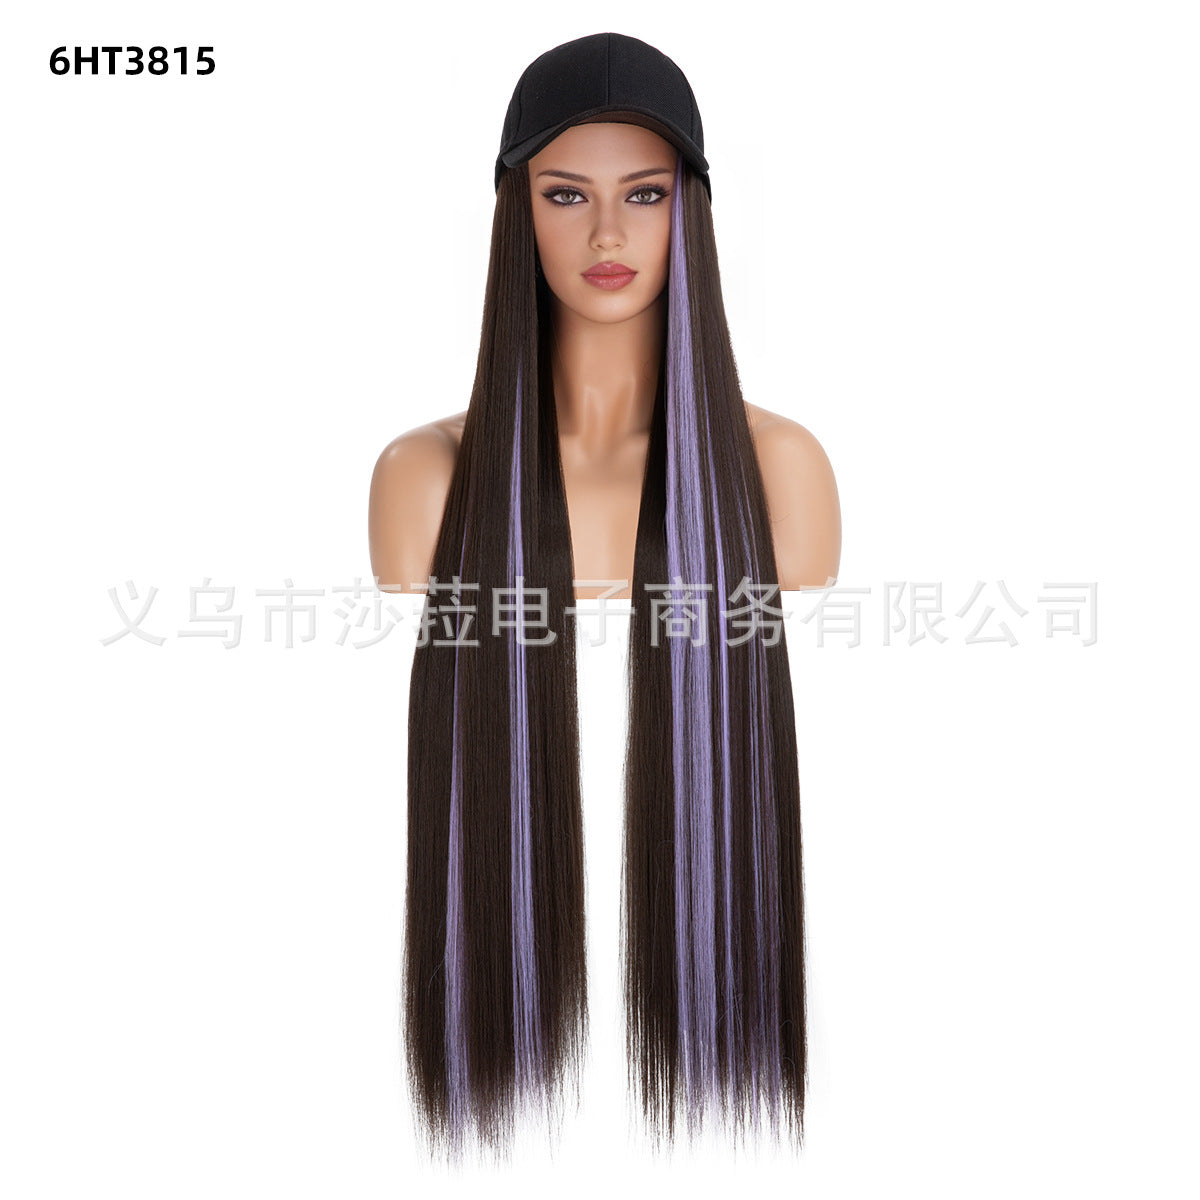 Black and Purple Ombre Long Straight Hair Wig with Knit Beanie Cap, Synthetic Full Head Hairpiece for Women